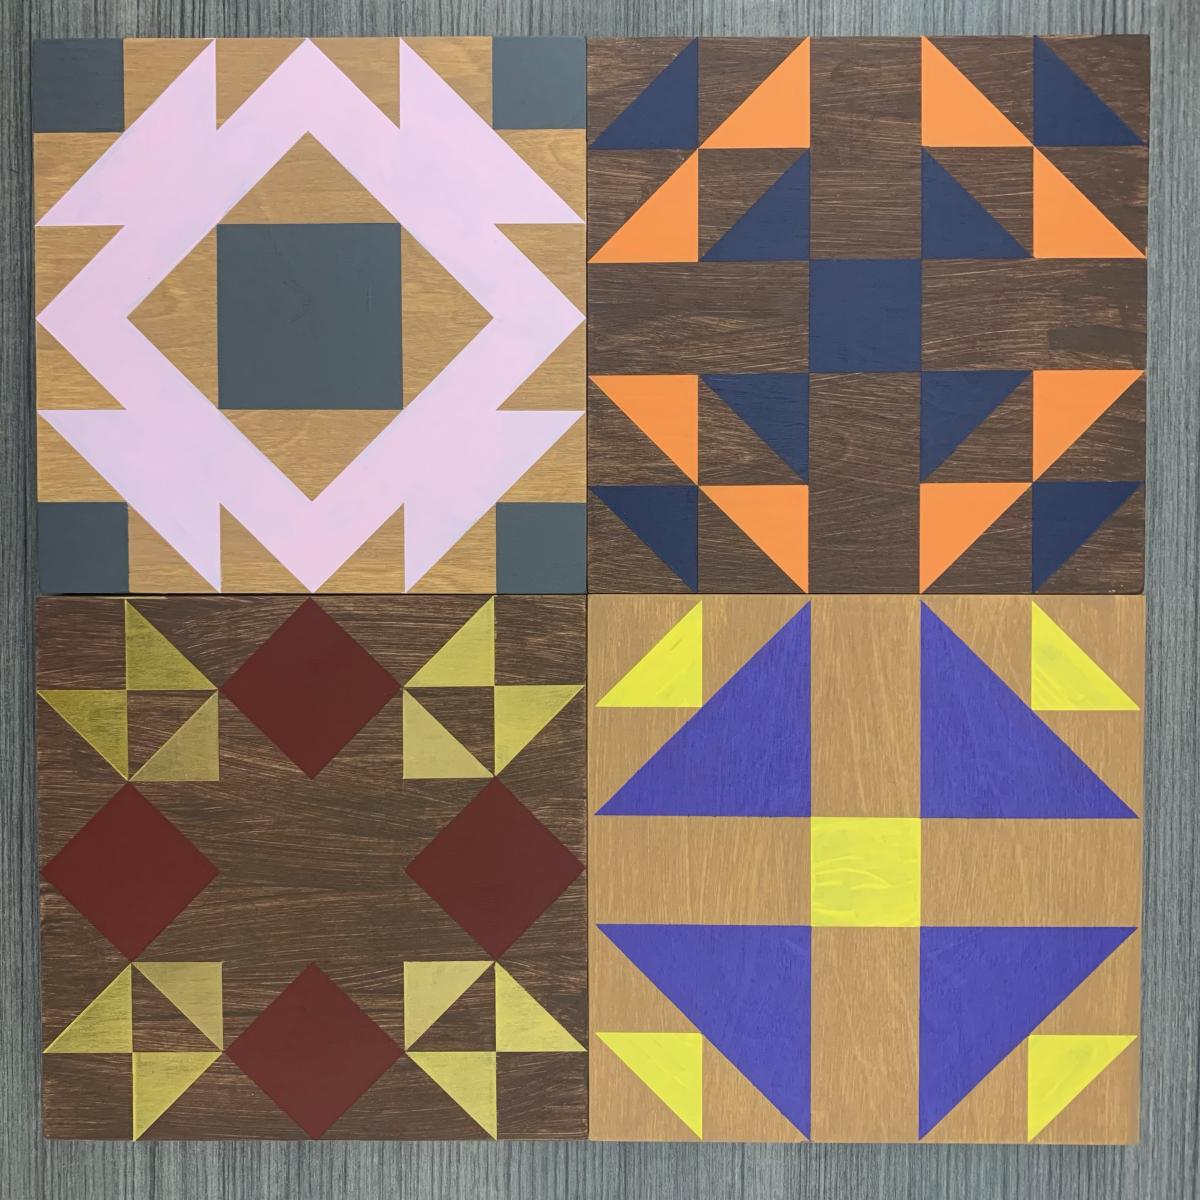 Painted Barn Quilt Samples